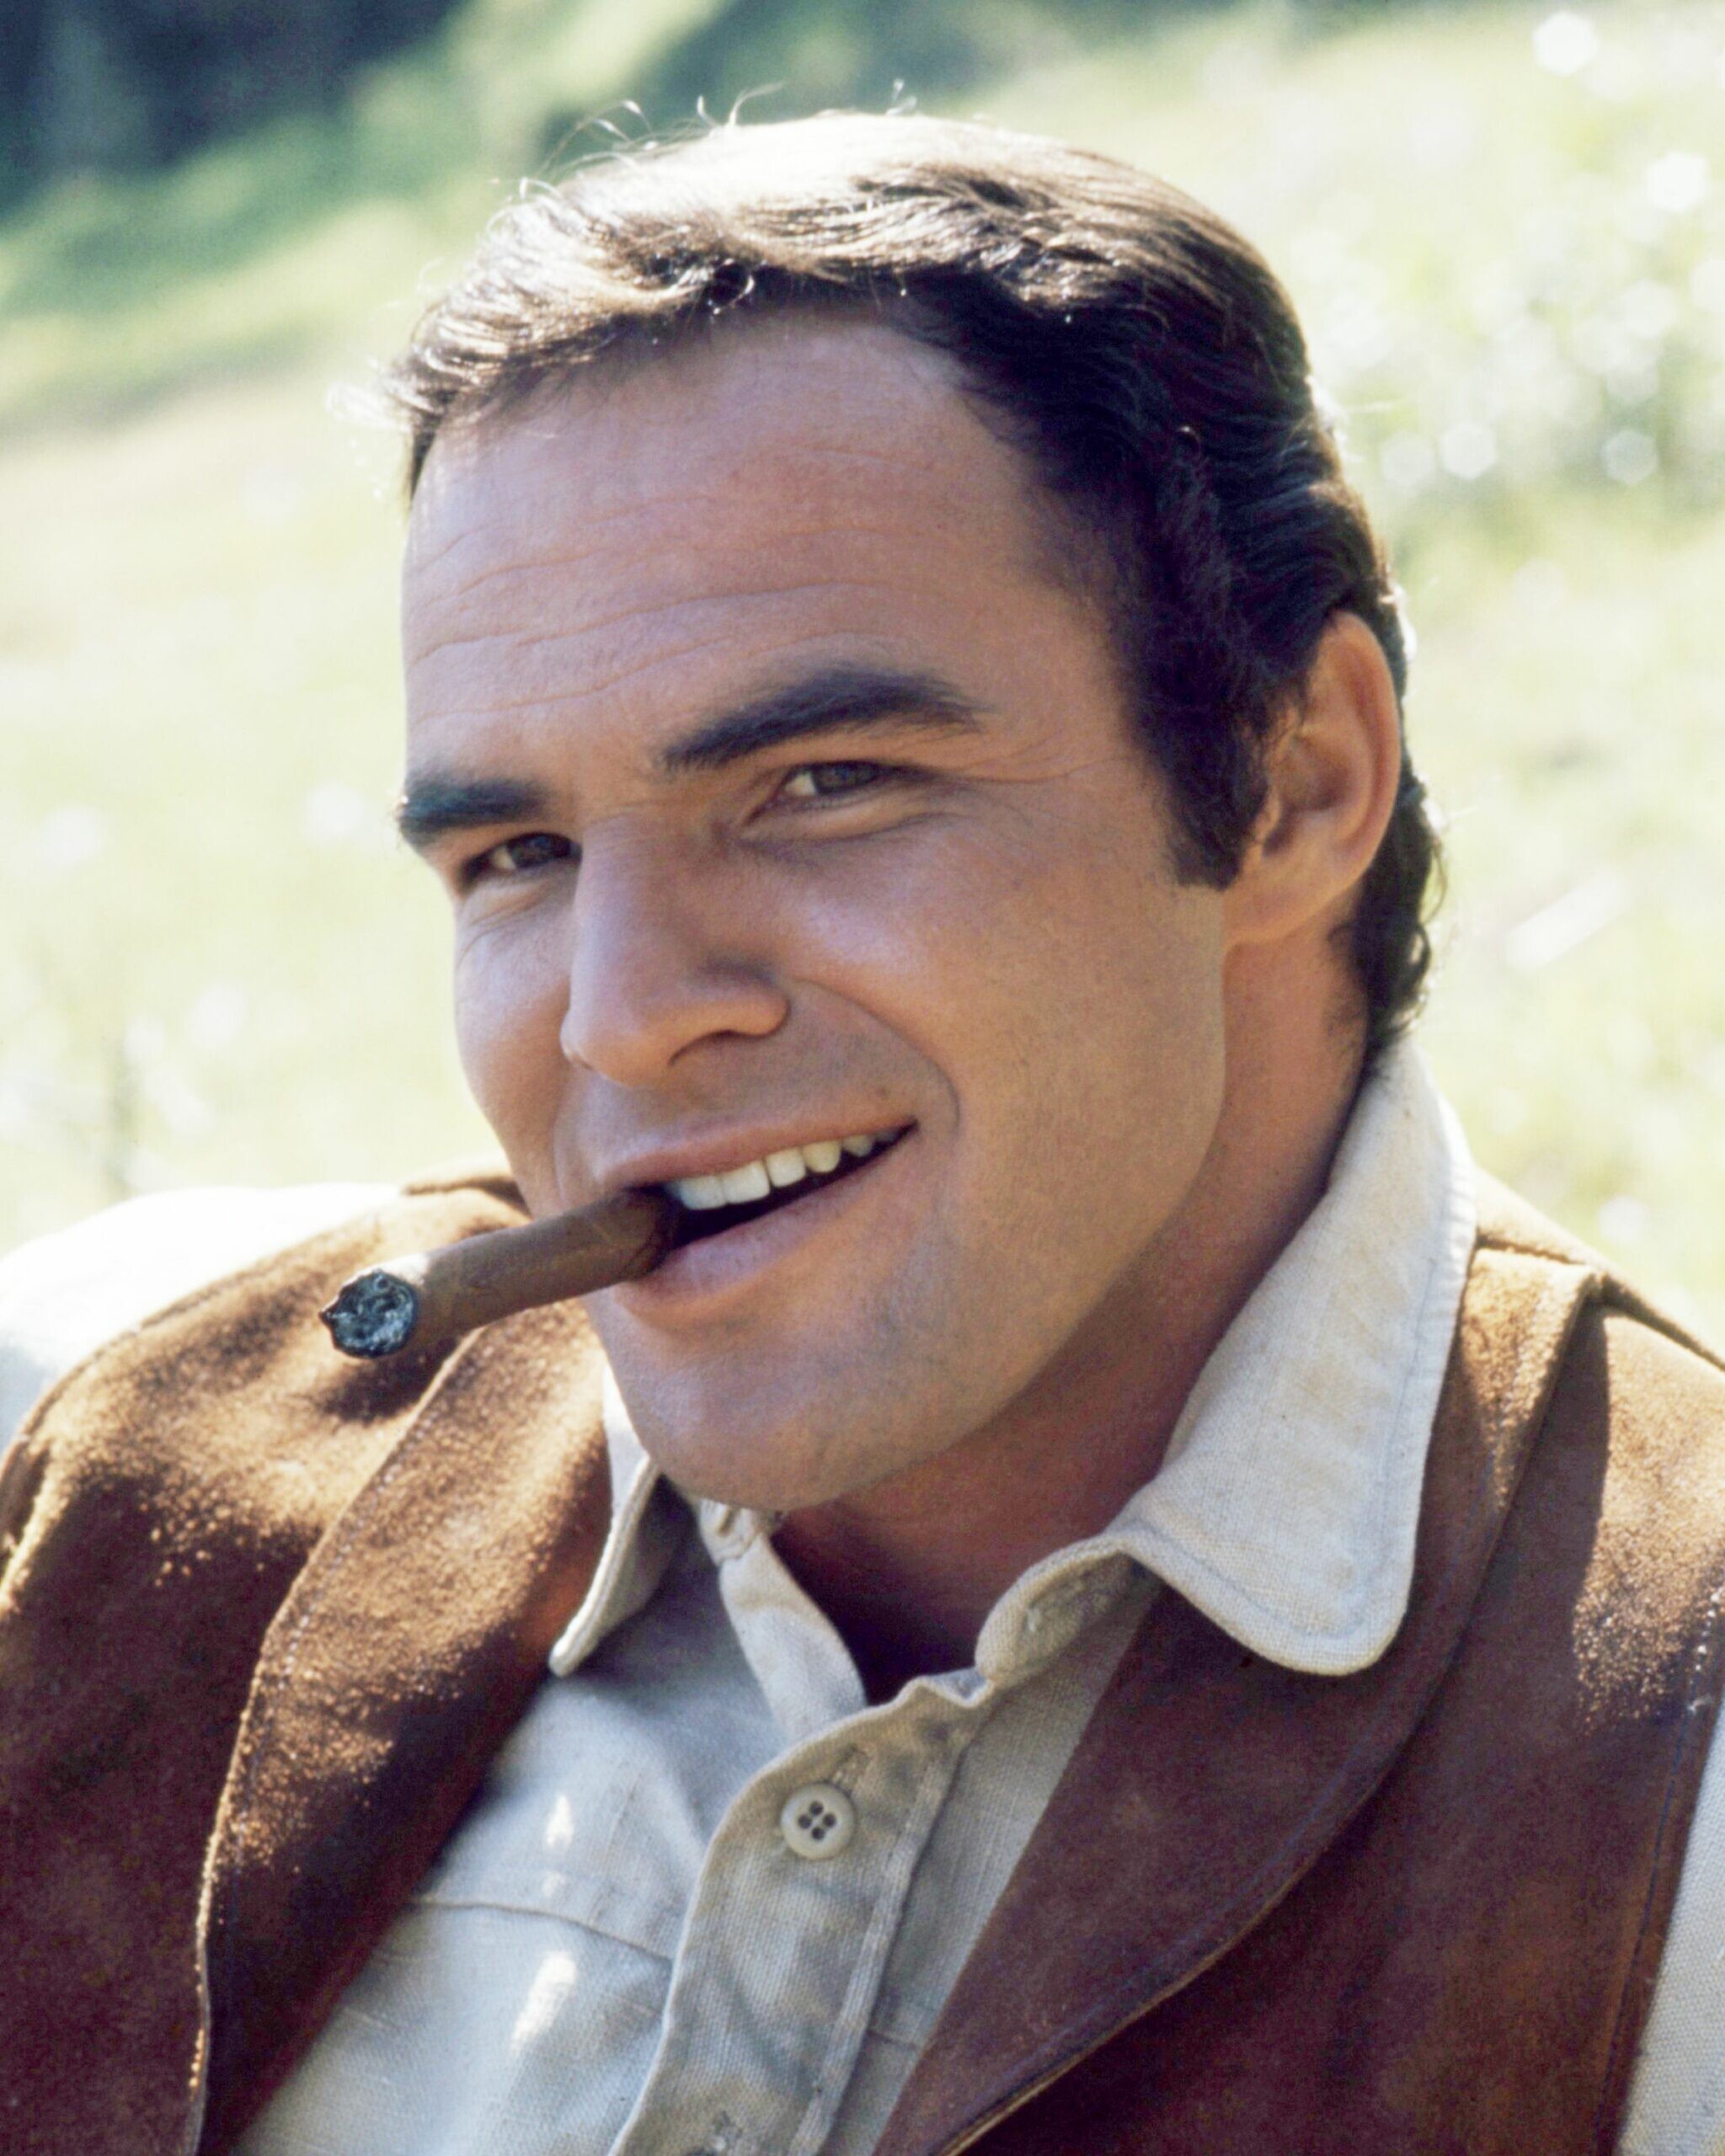 Burt Reynolds: Number one box-office star from 1978 to 1982, Top Ten Money Making Stars Poll, Pop-culture history. 2050x2560 HD Wallpaper.